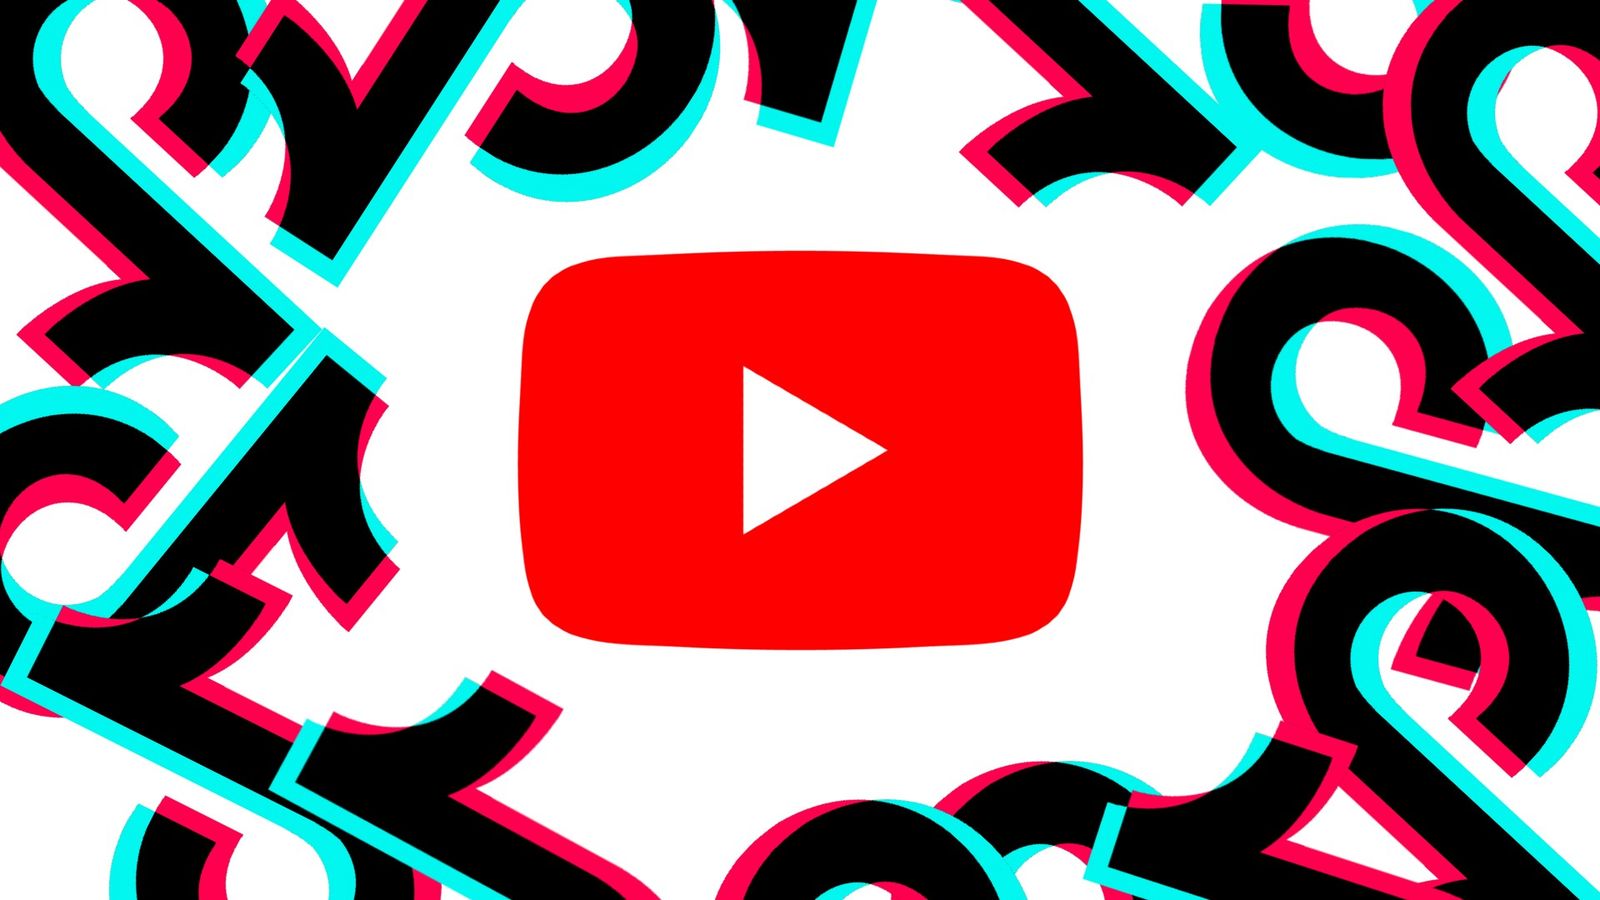 A YouTube logo is surrounded by TikTok logos on a white background.